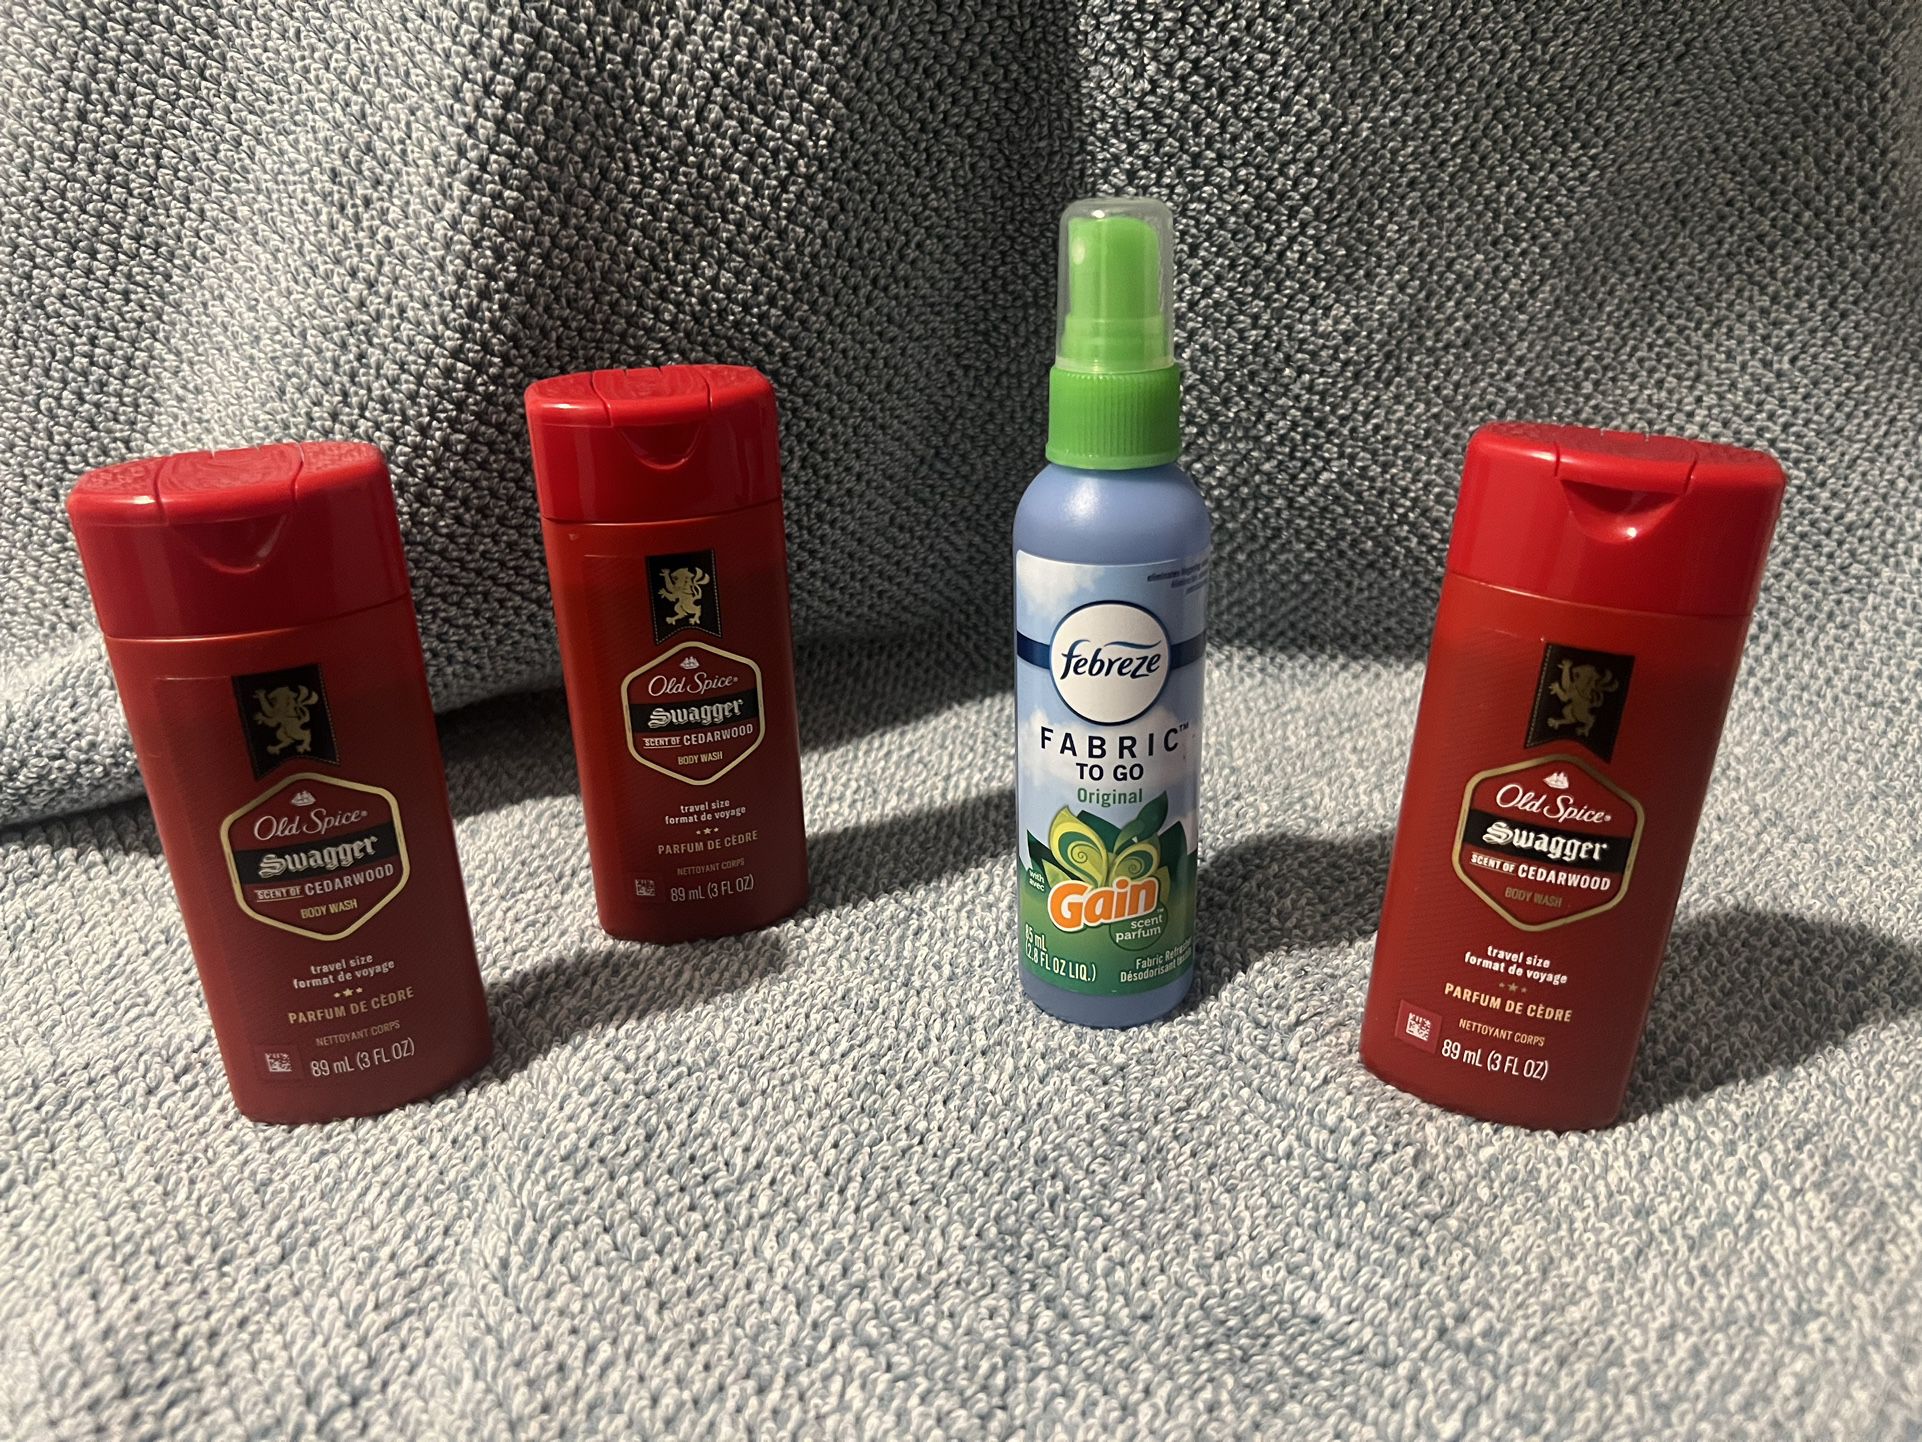 Old Spice Travel Size Body Wash & Febreze On The Go